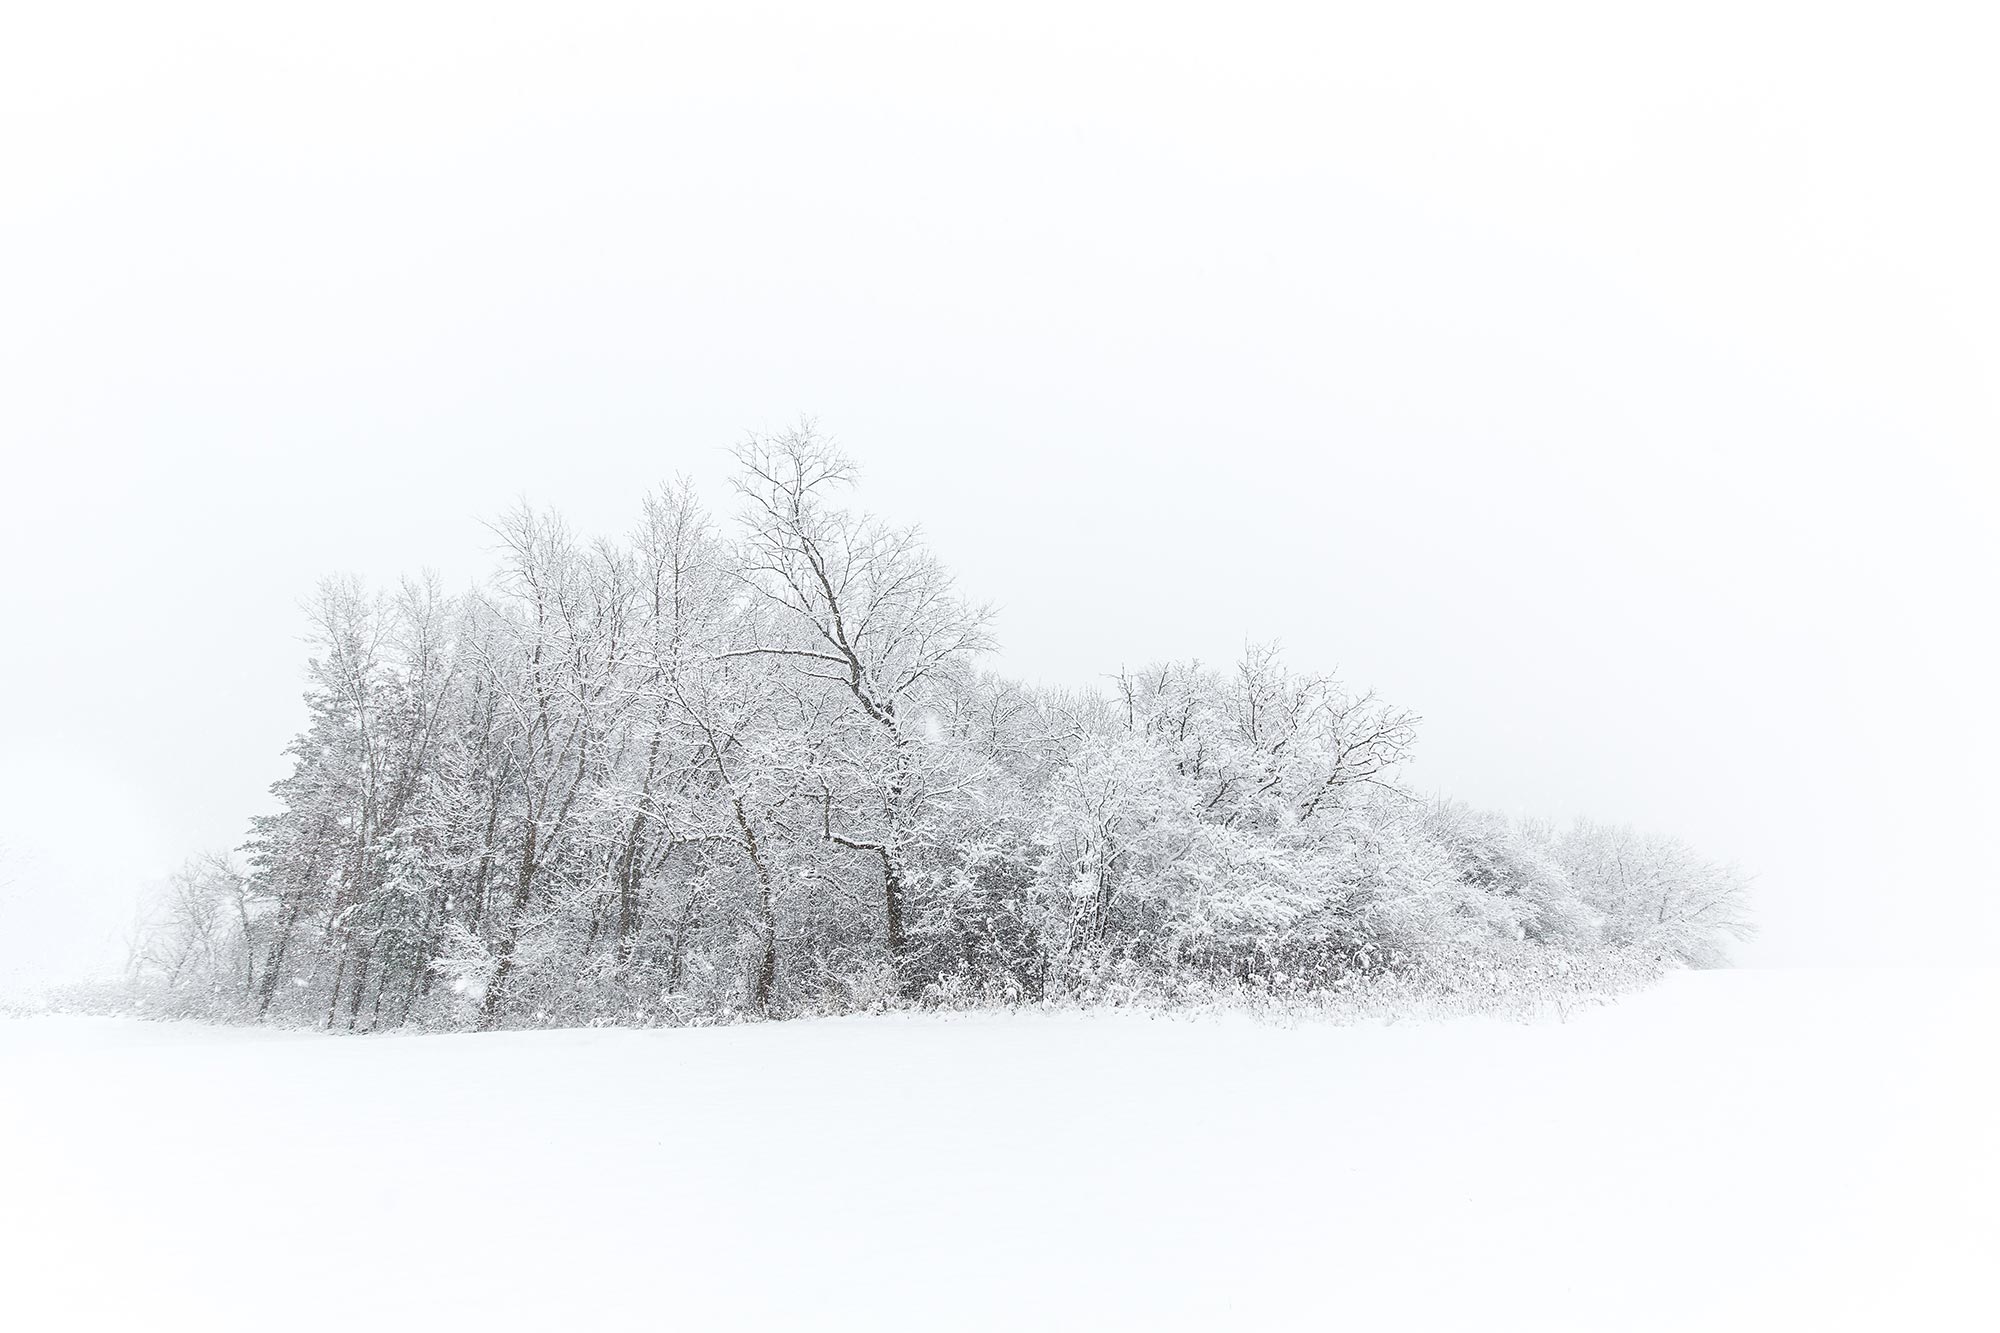 Outcropping of trees during a blizzard at Leroy Oaks, St Charles, IL